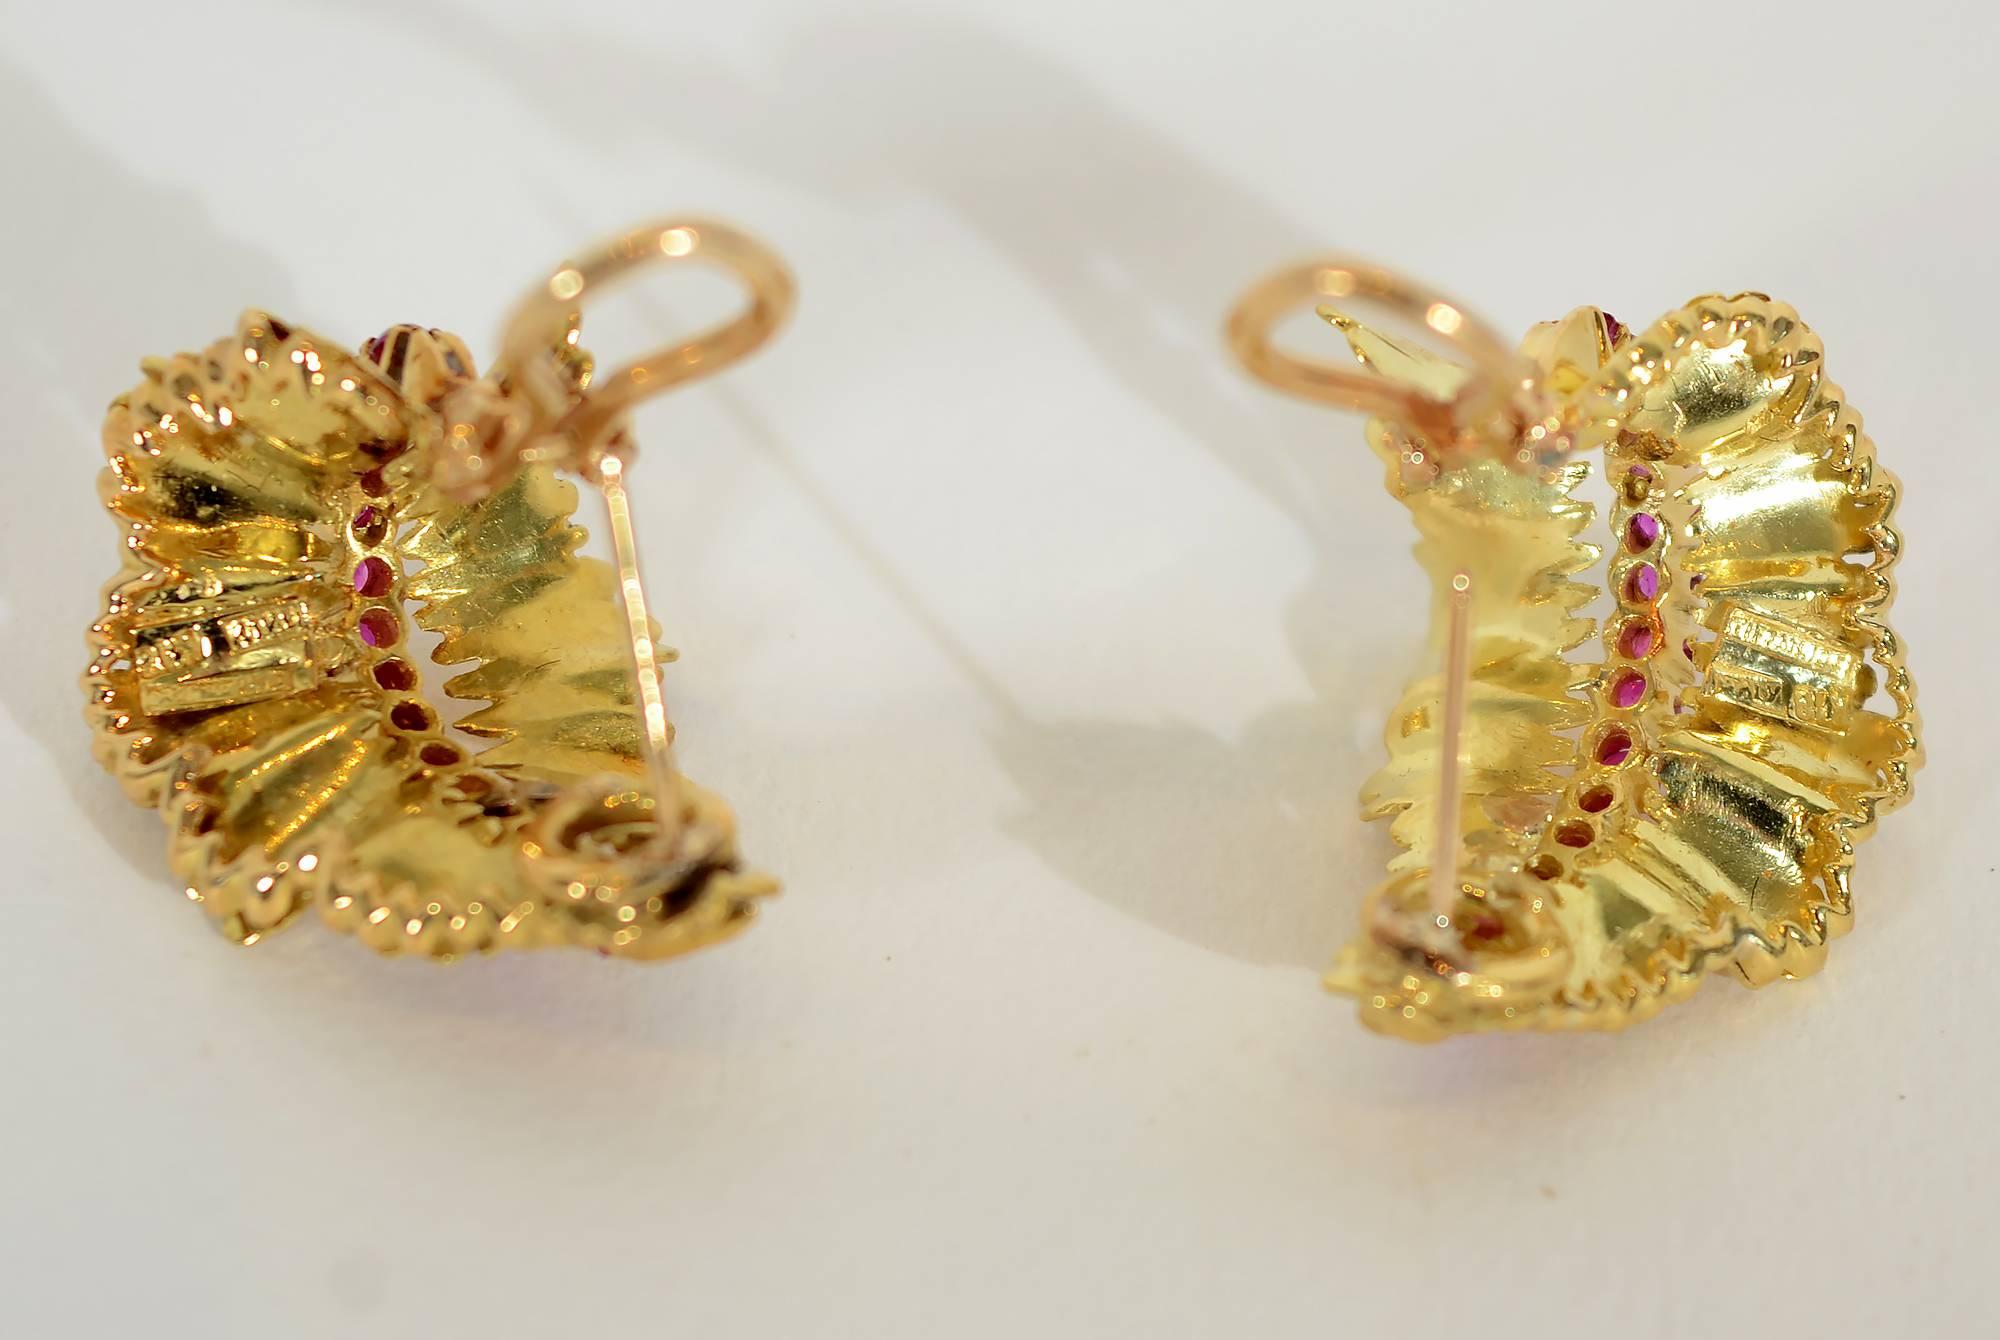 Intricately made gold with ruby earrings by Tiffany. The stylized leaves are made of undulating half hoops that are delicately incised with tiny, irregular lozenge shaped pieces and spines of rubies running vertically. The overall shape of the